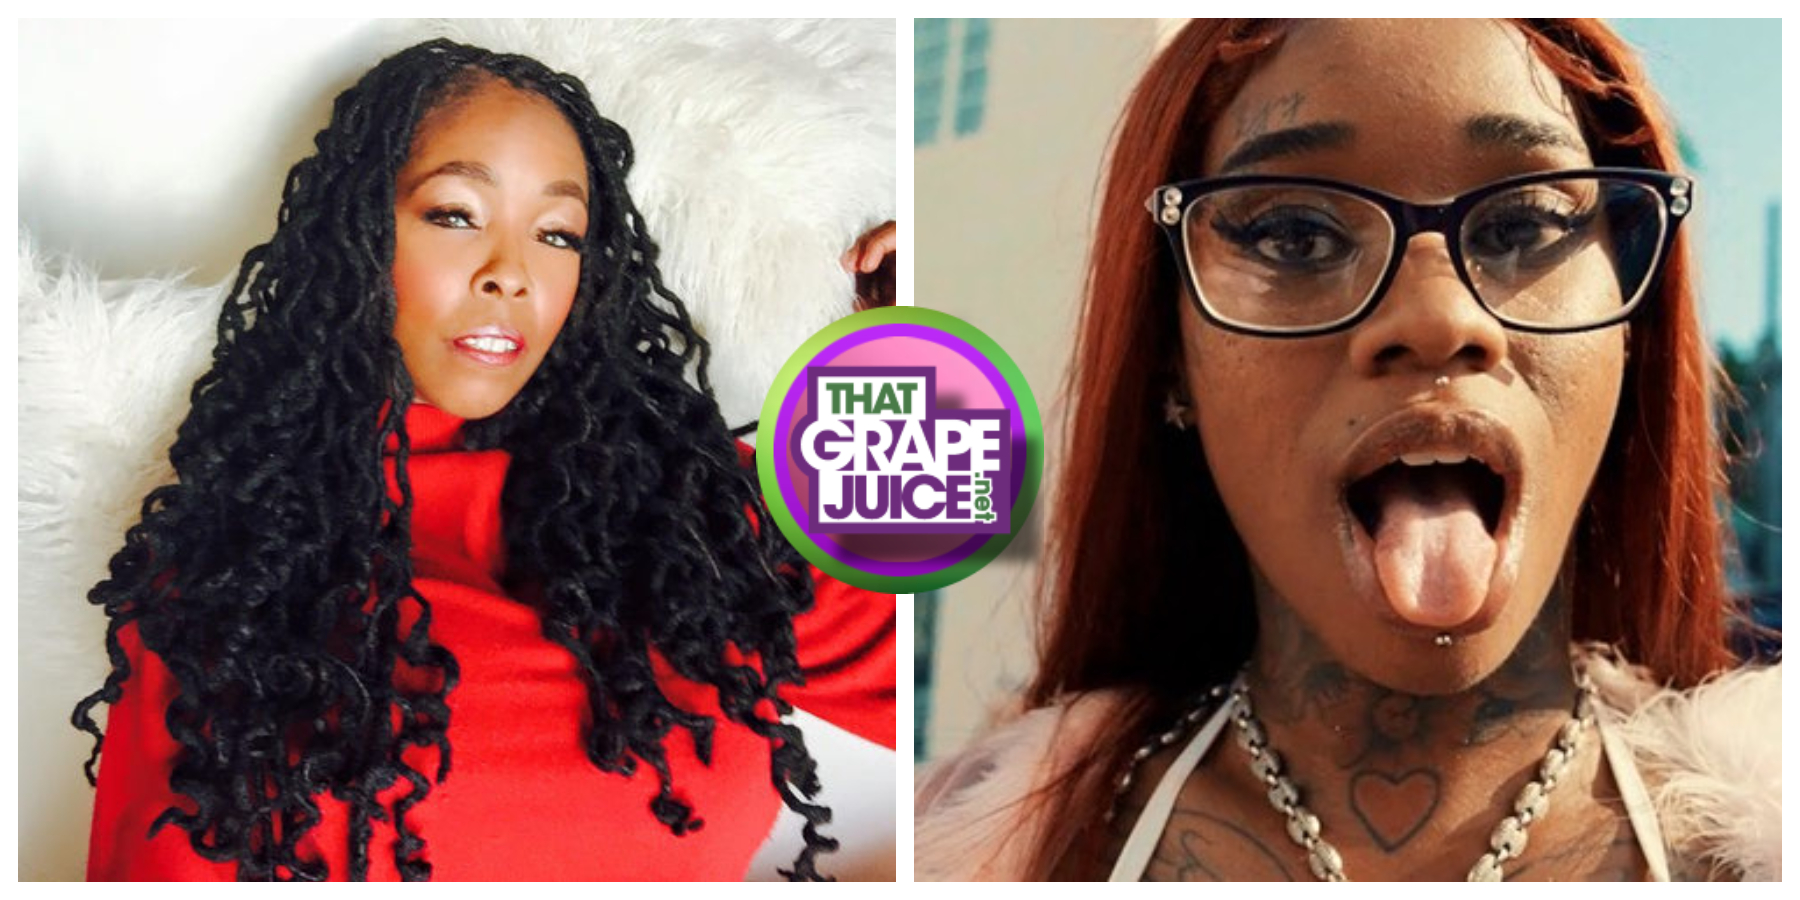 She’s “Jealous”: Sexyy Red Responds to Khia Calling Her A Stinking Llama, “Deadbeat Mom” & Crusty “Young Thug Lookalike”